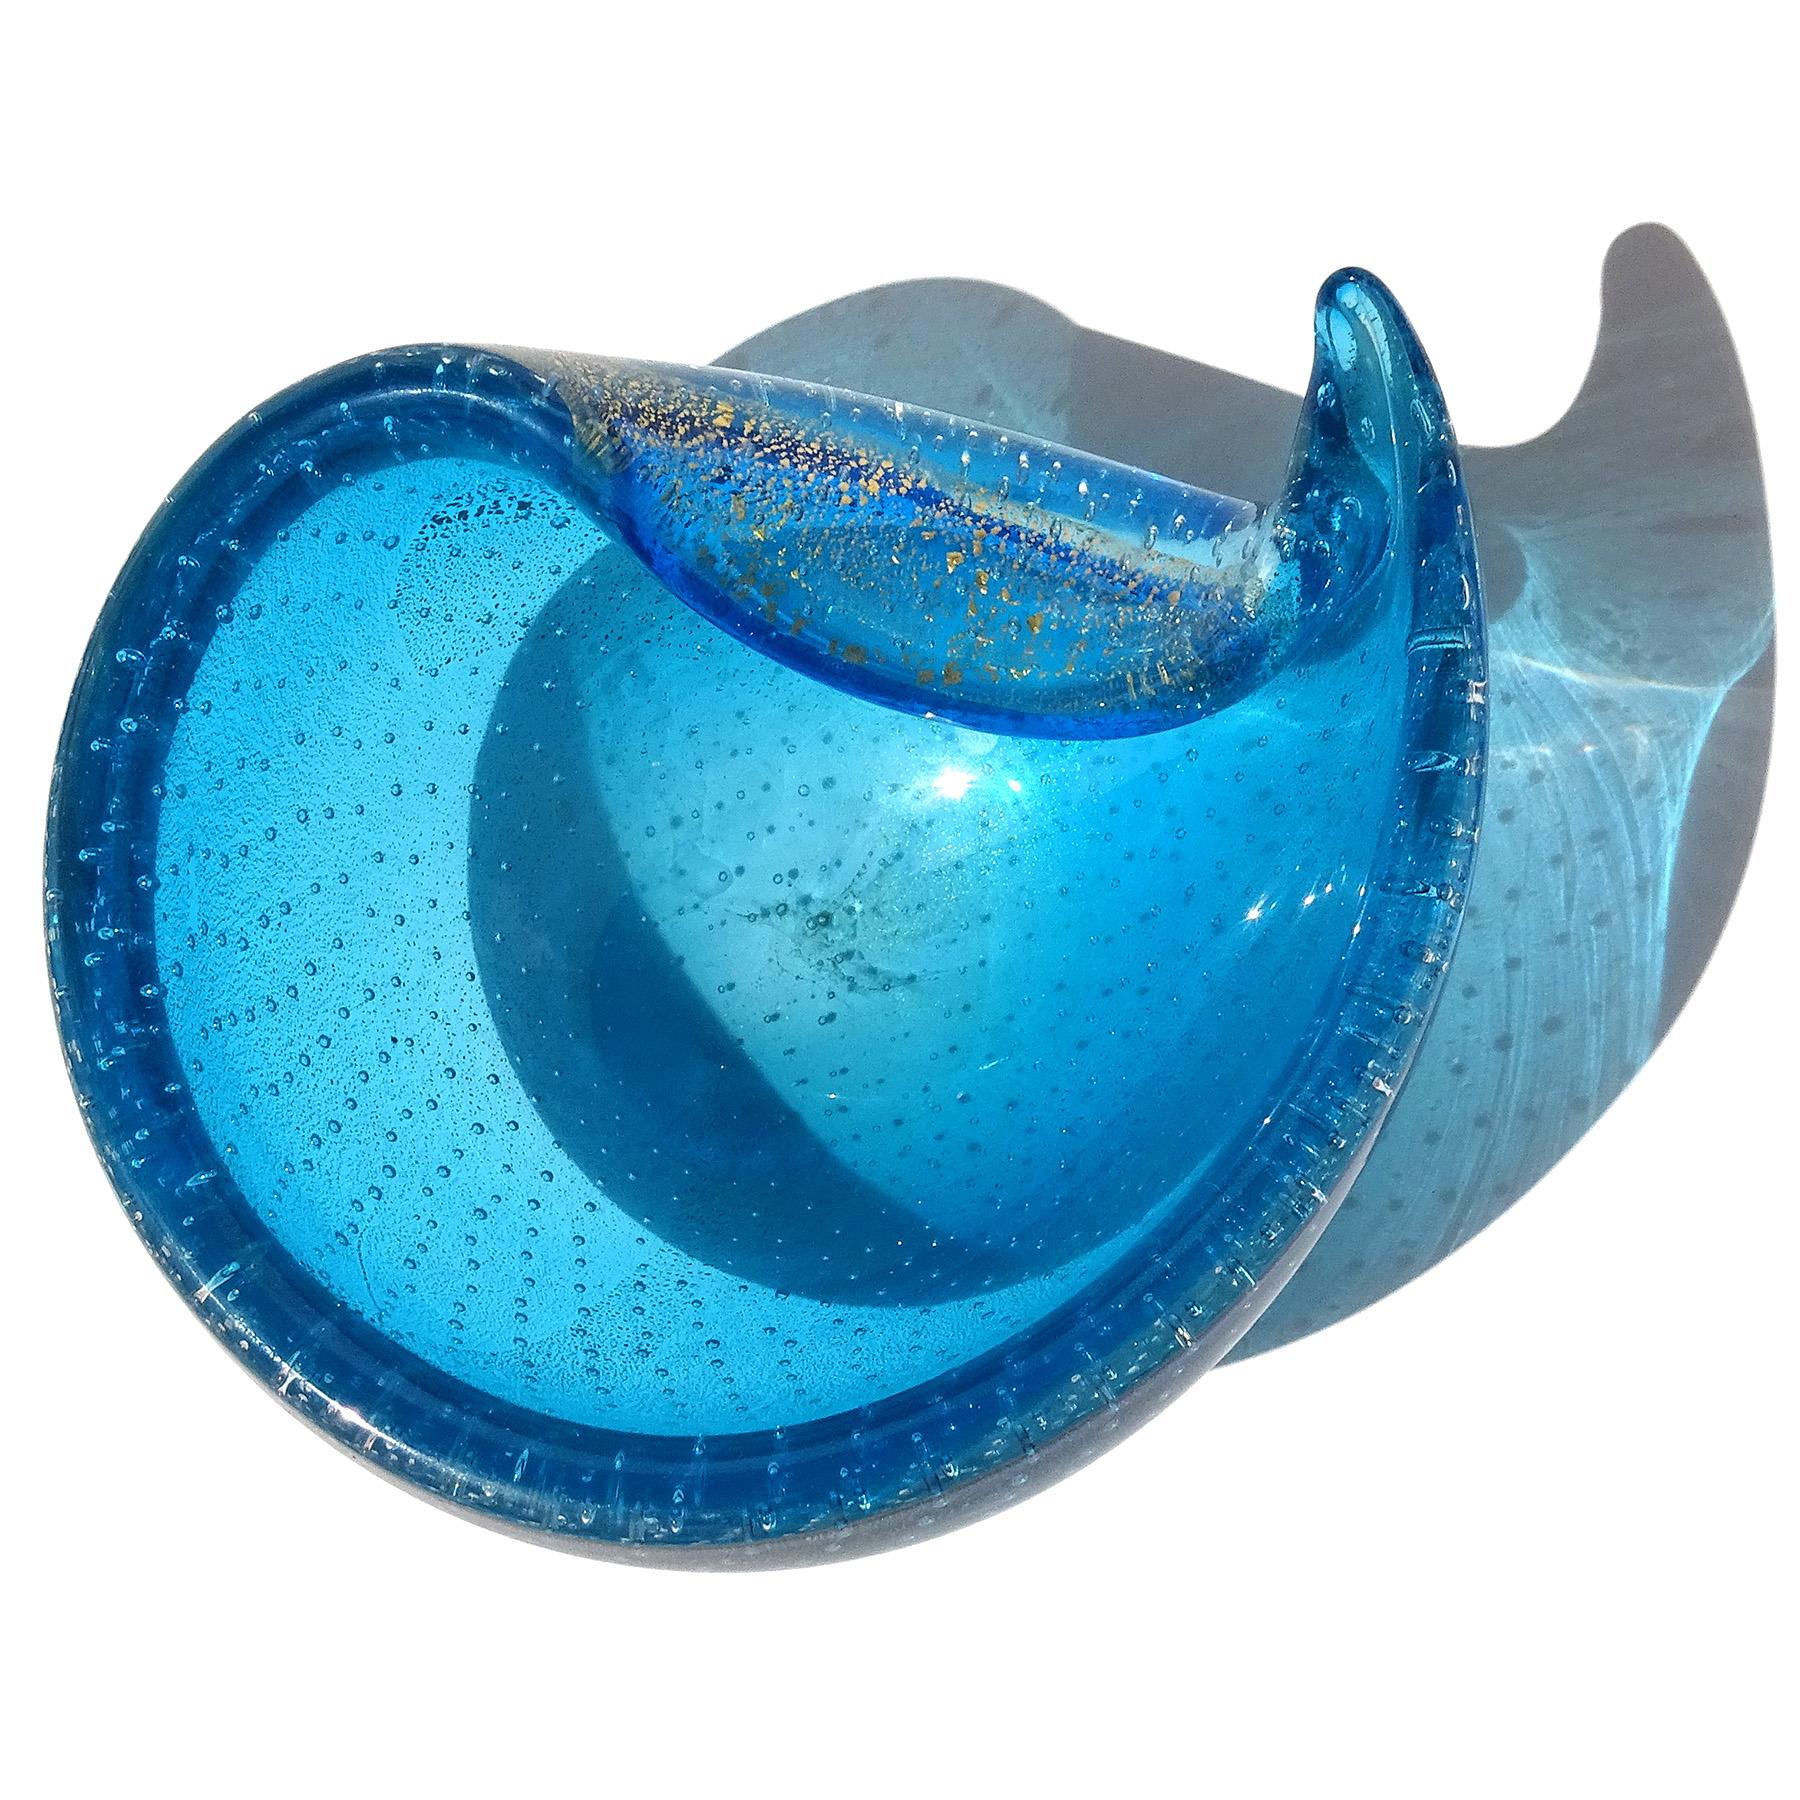 Beautiful vintage Murano hand blown sapphire blue, bubbles and gold flecks Italian art glass tear / water drop shaped decorative bowl, vide poche. Created in the manner of the Seguso Vetri d'Arte company and designer Archimede Seguso. The piece is